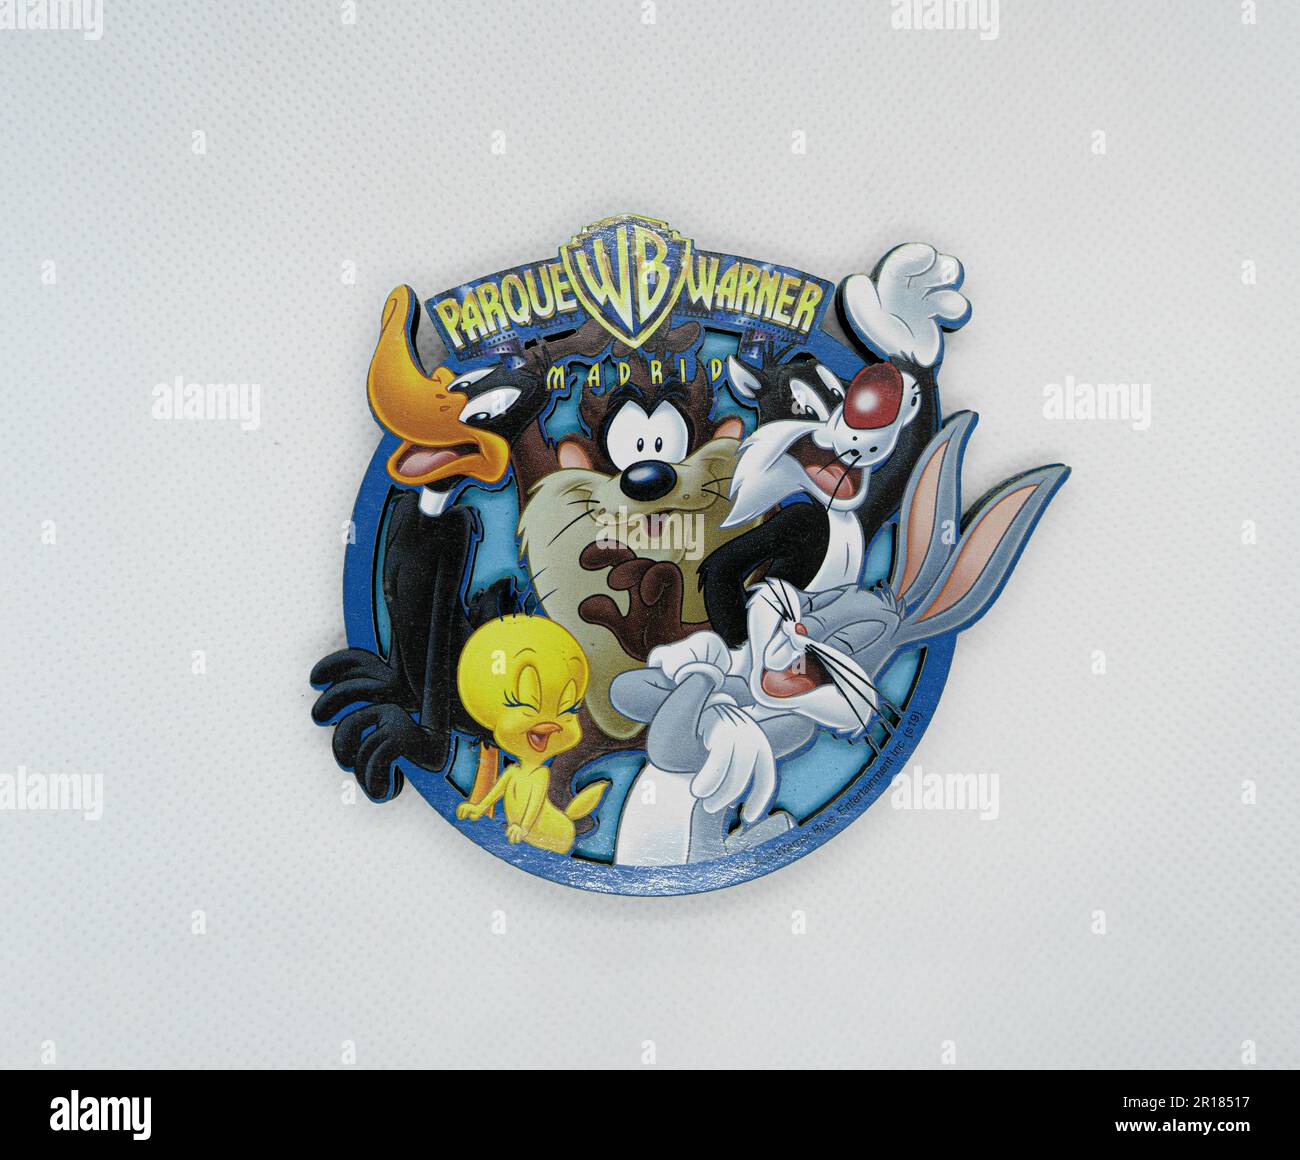 A colorful cartoon character sticker of classic Looney Tunes characters on a plain white background Stock Photo